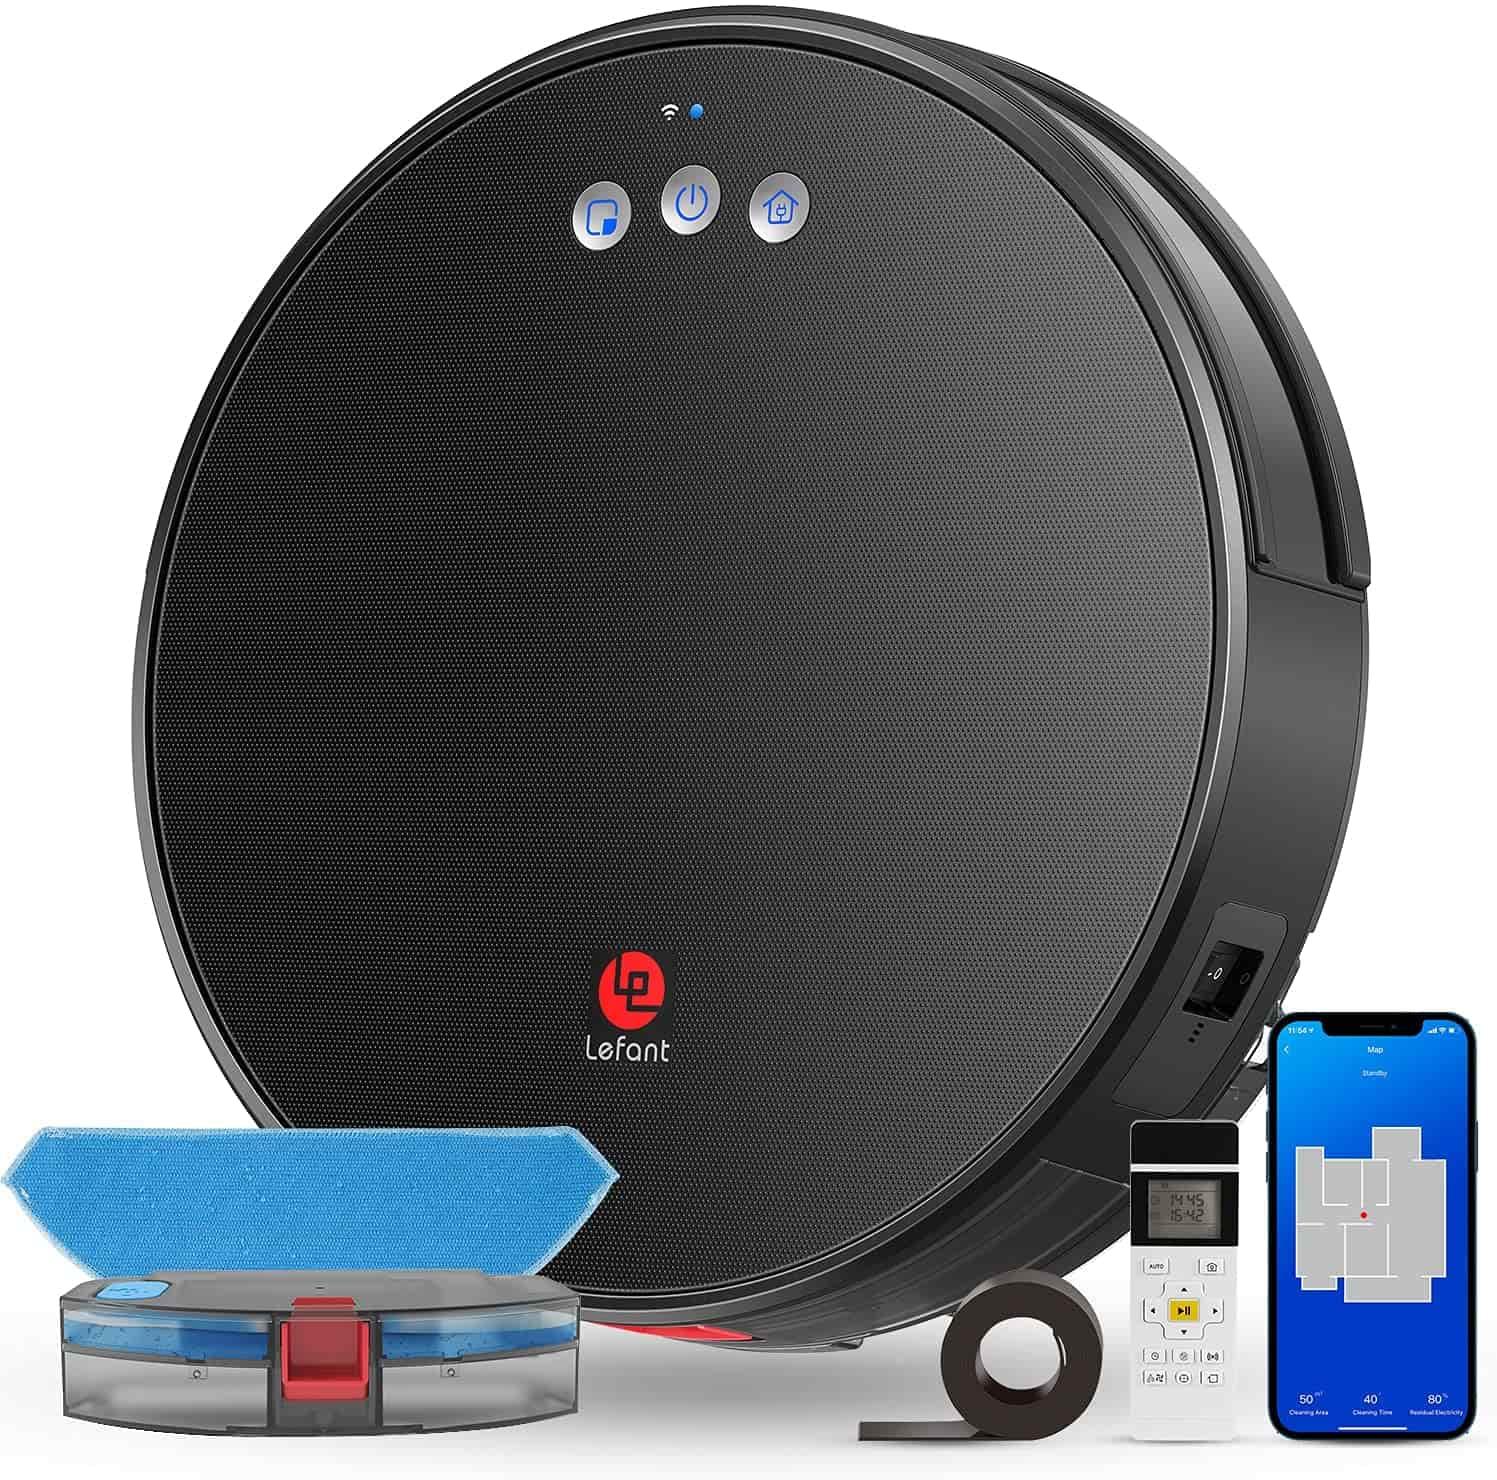 The Lefant M210 Robot Vacuum Cleaner Is 47% Off at